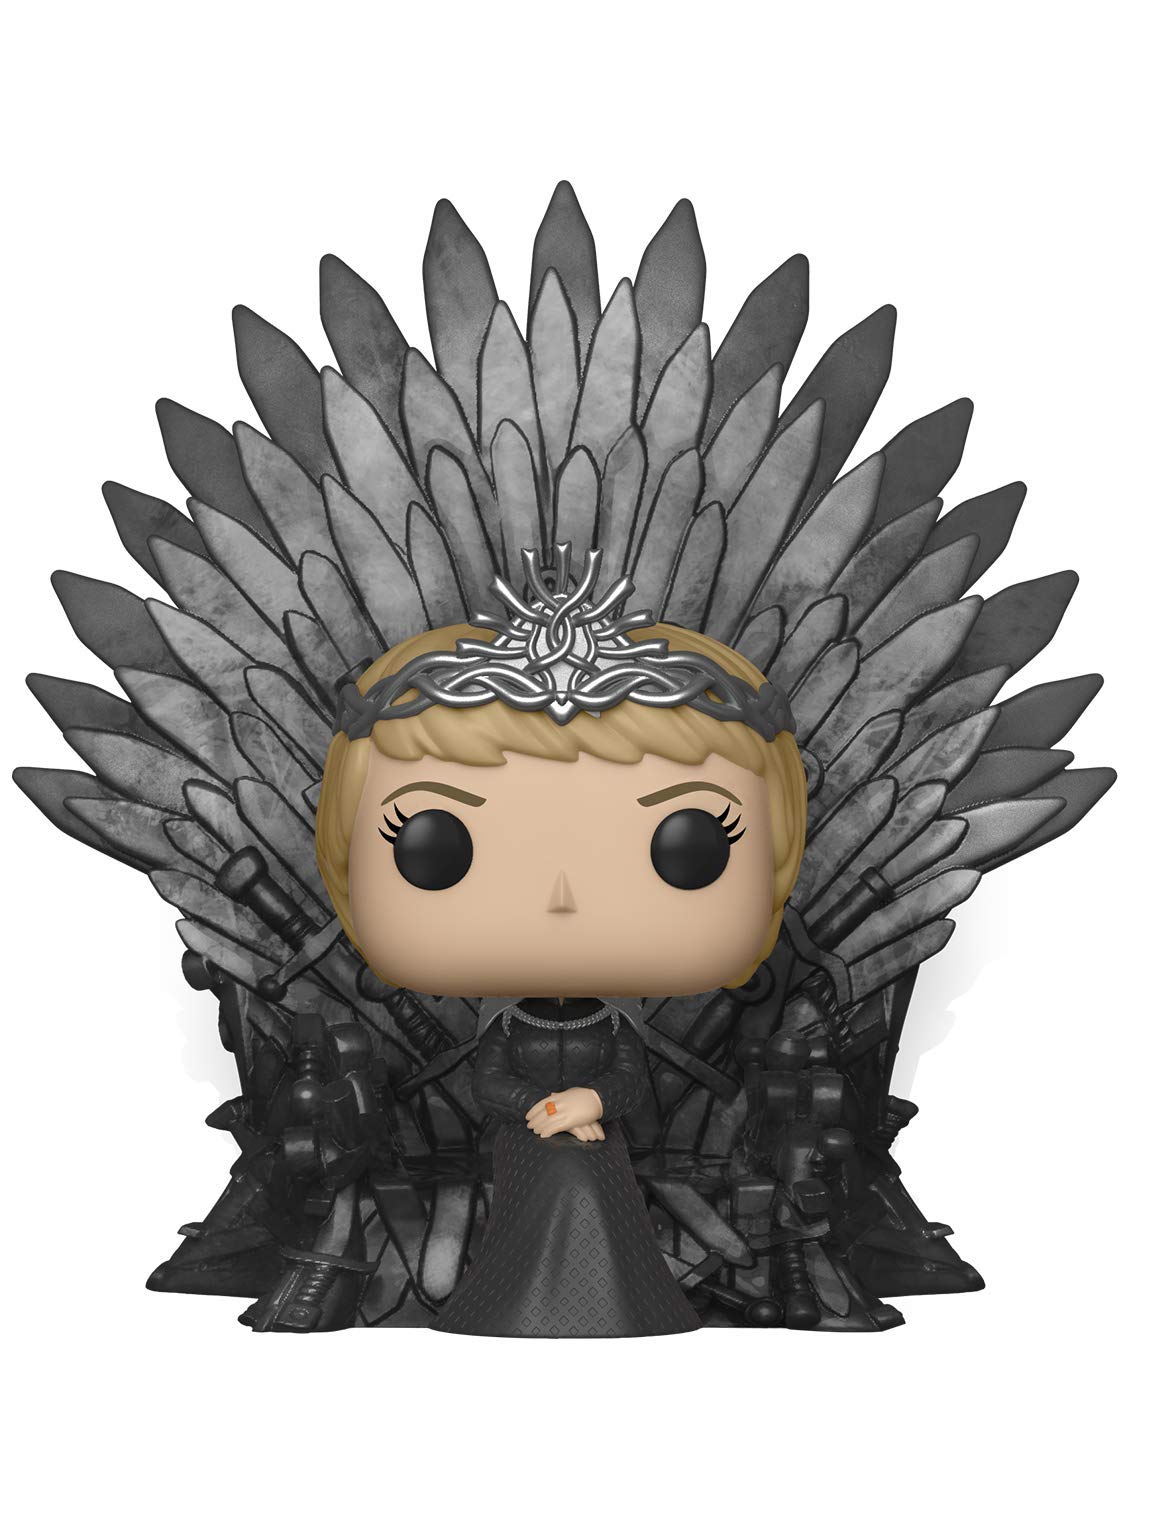 Funko POP! Deluxe Game of Thrones Cersei Lannister Sitting on Iron Throne